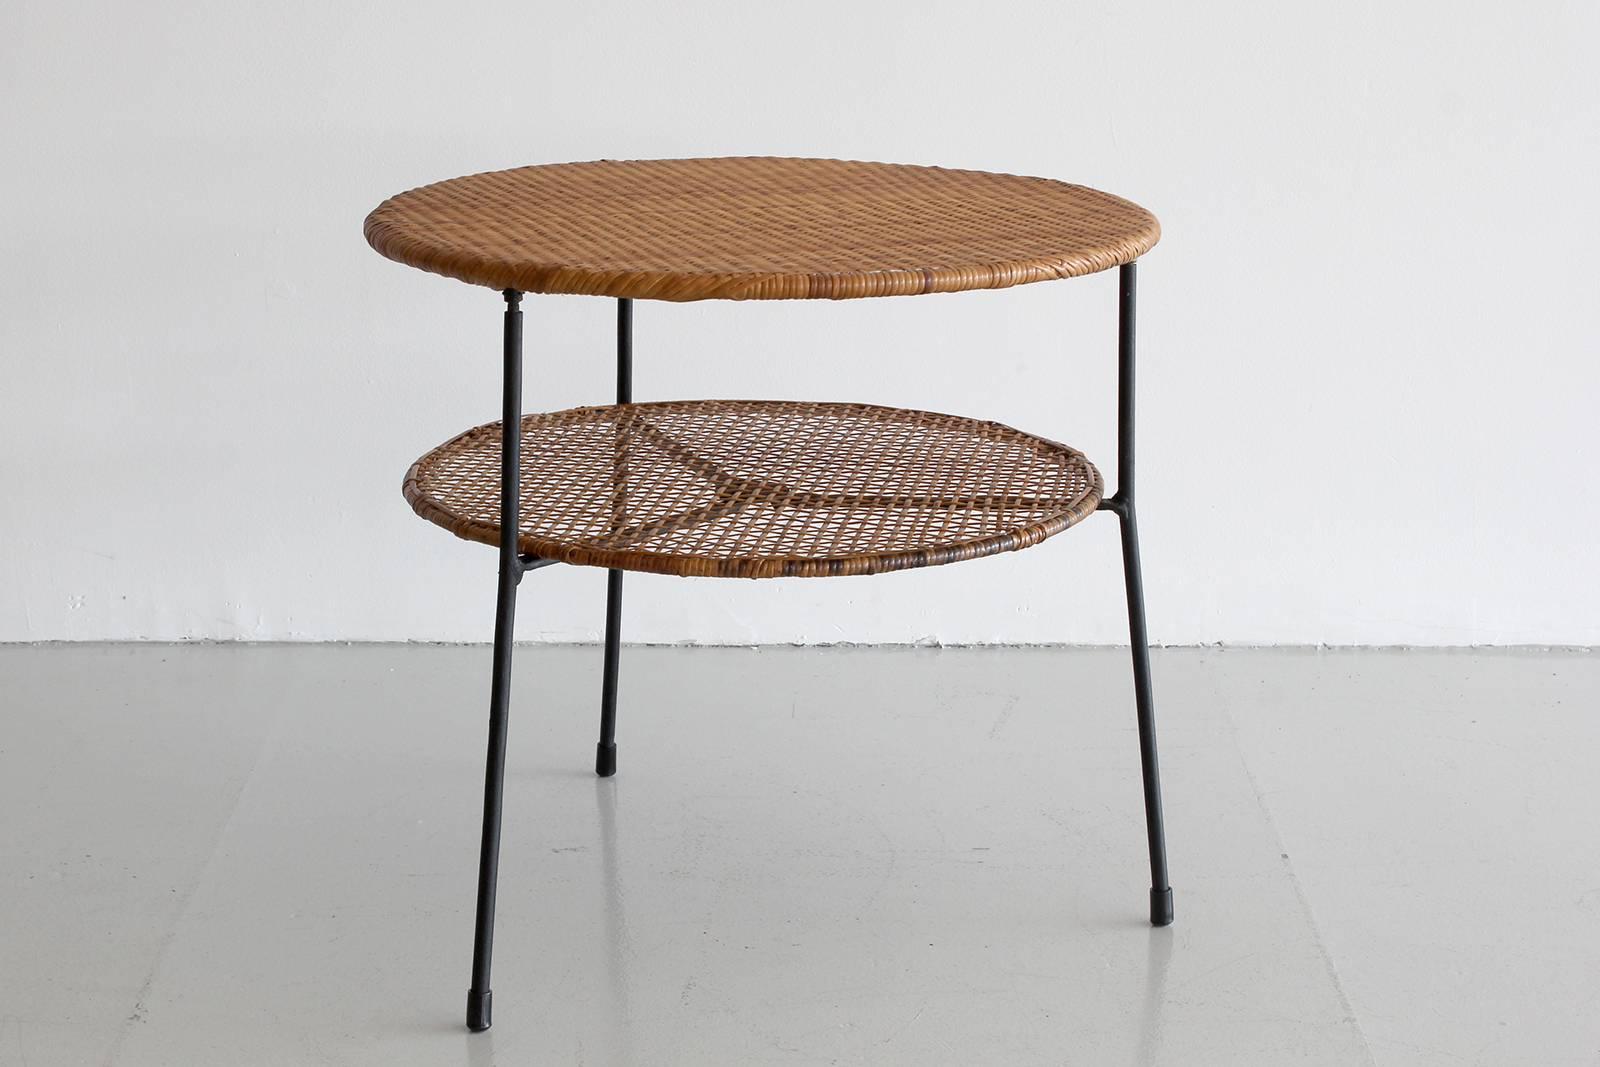 Danny Ho Fong table with iron base and floating rattan shelf.